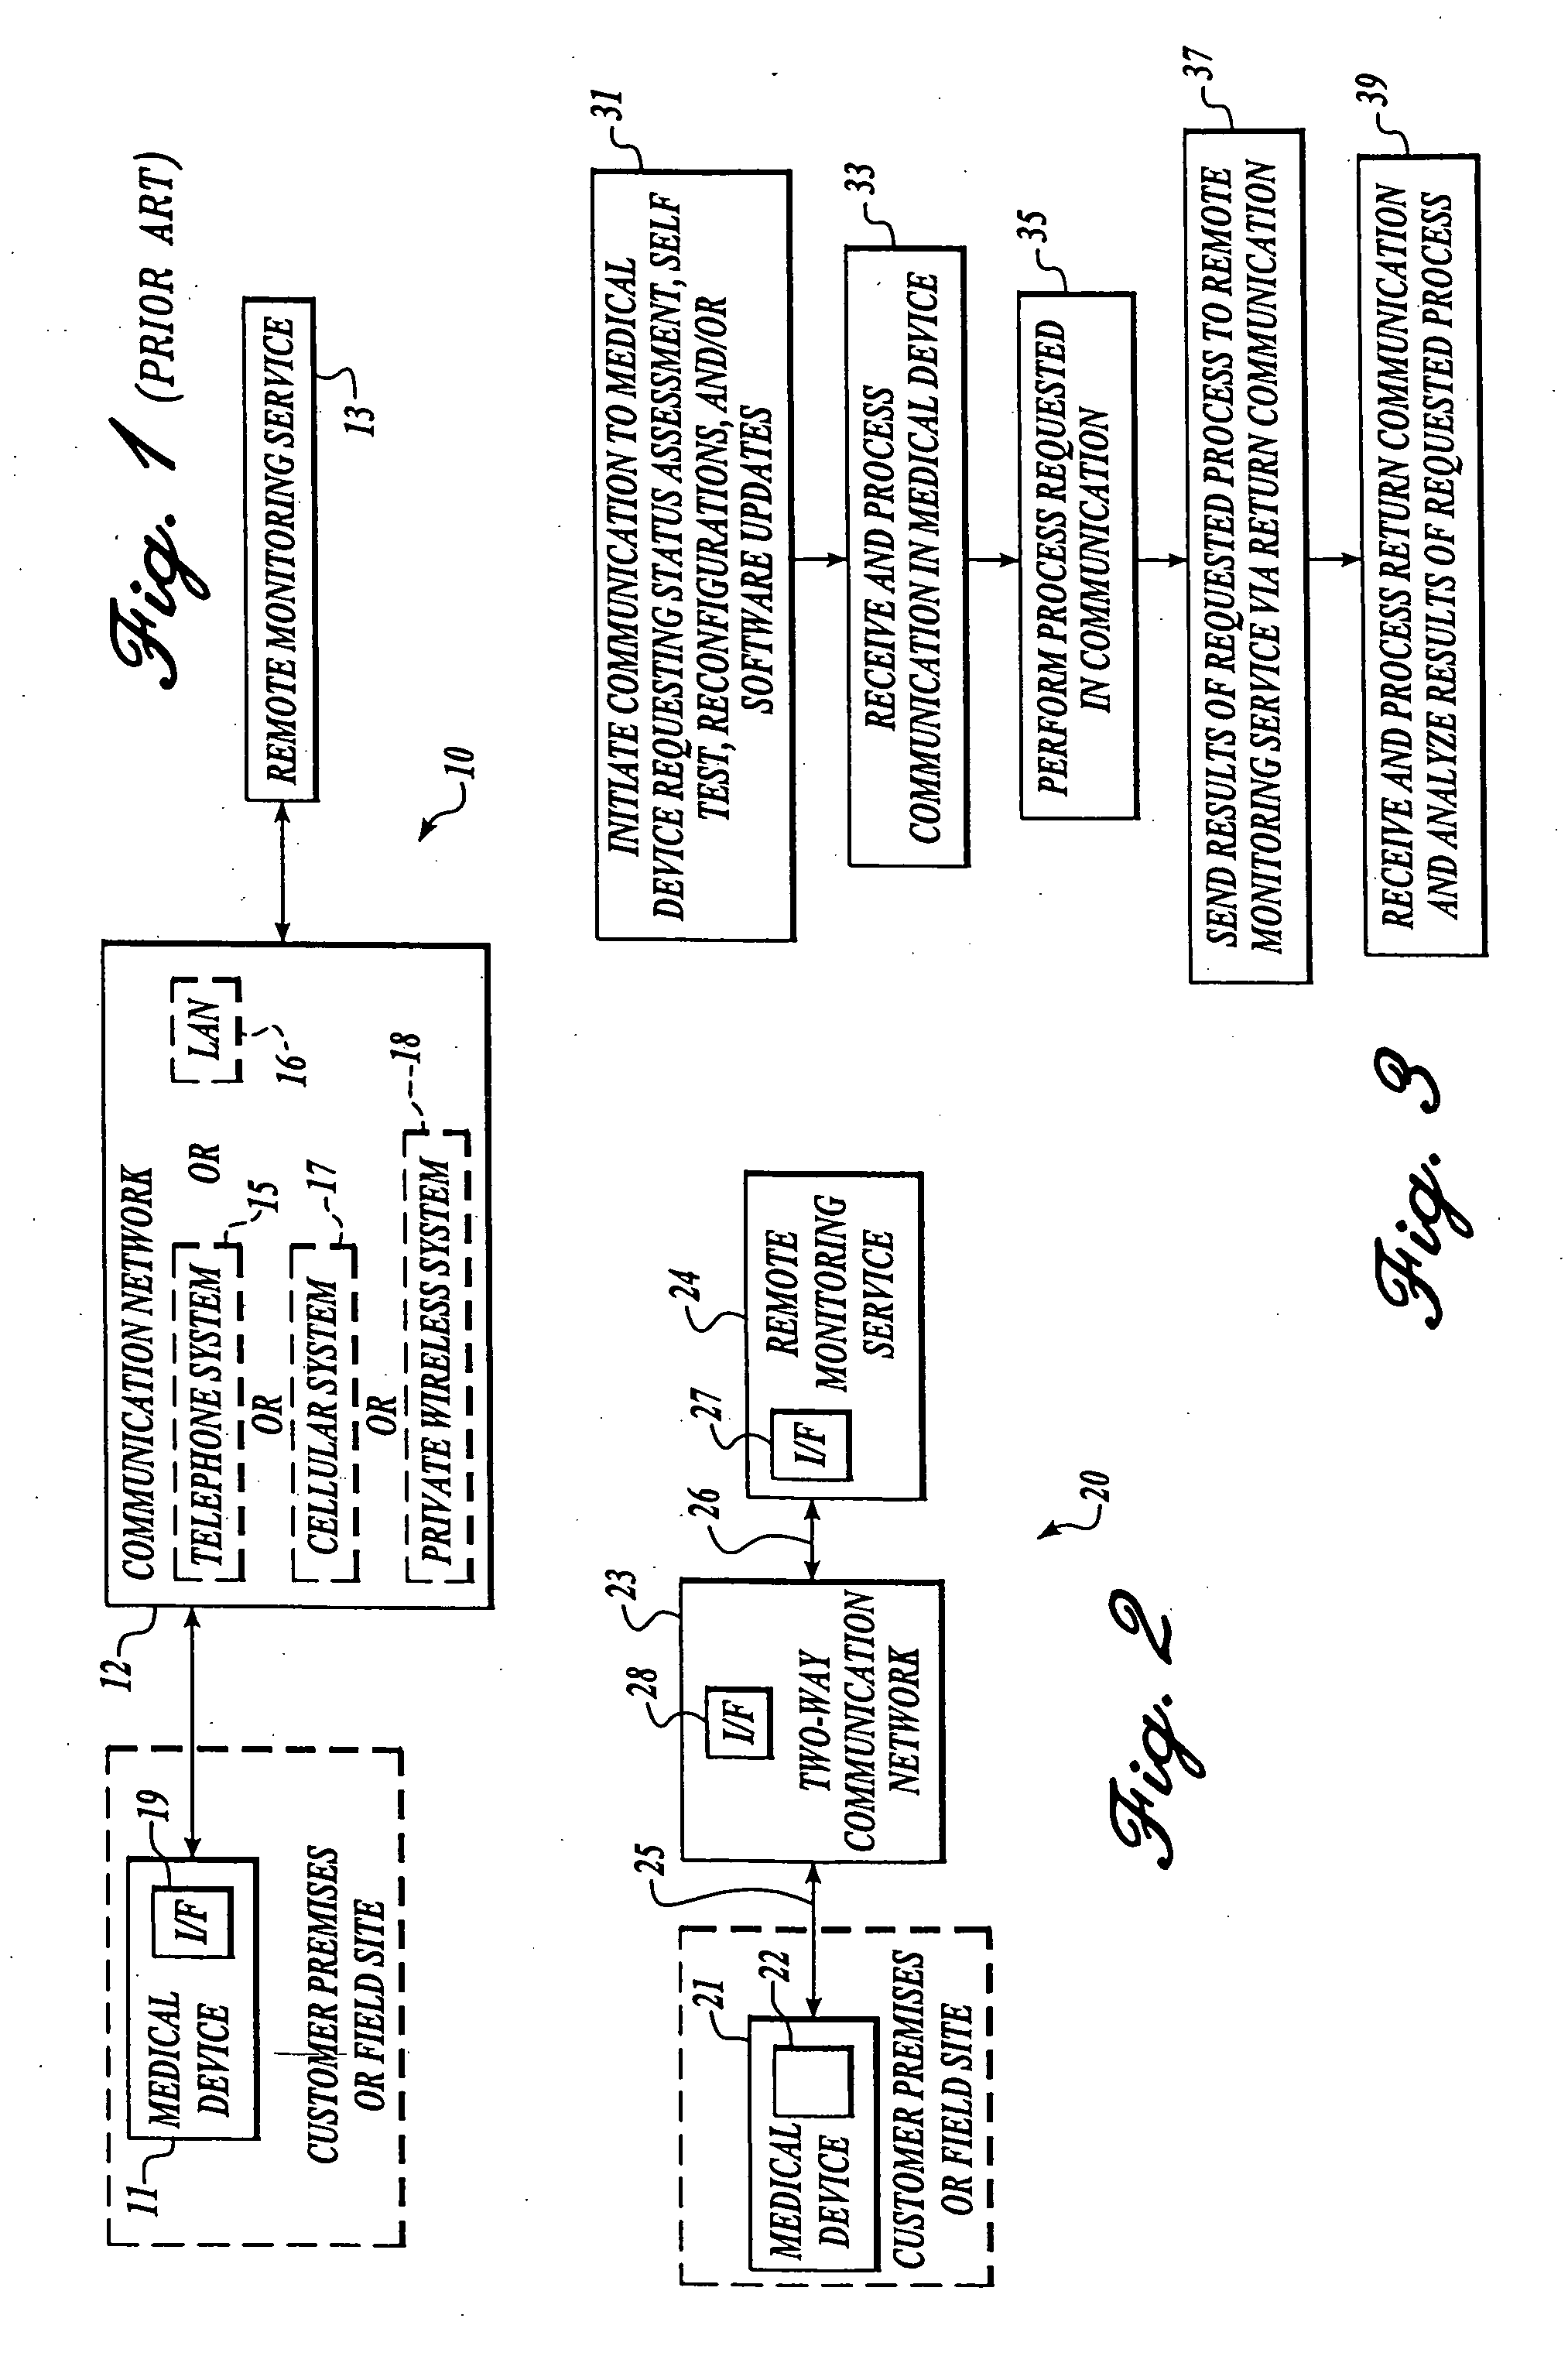 Method and apparatus for remote wireless communication with a medical device